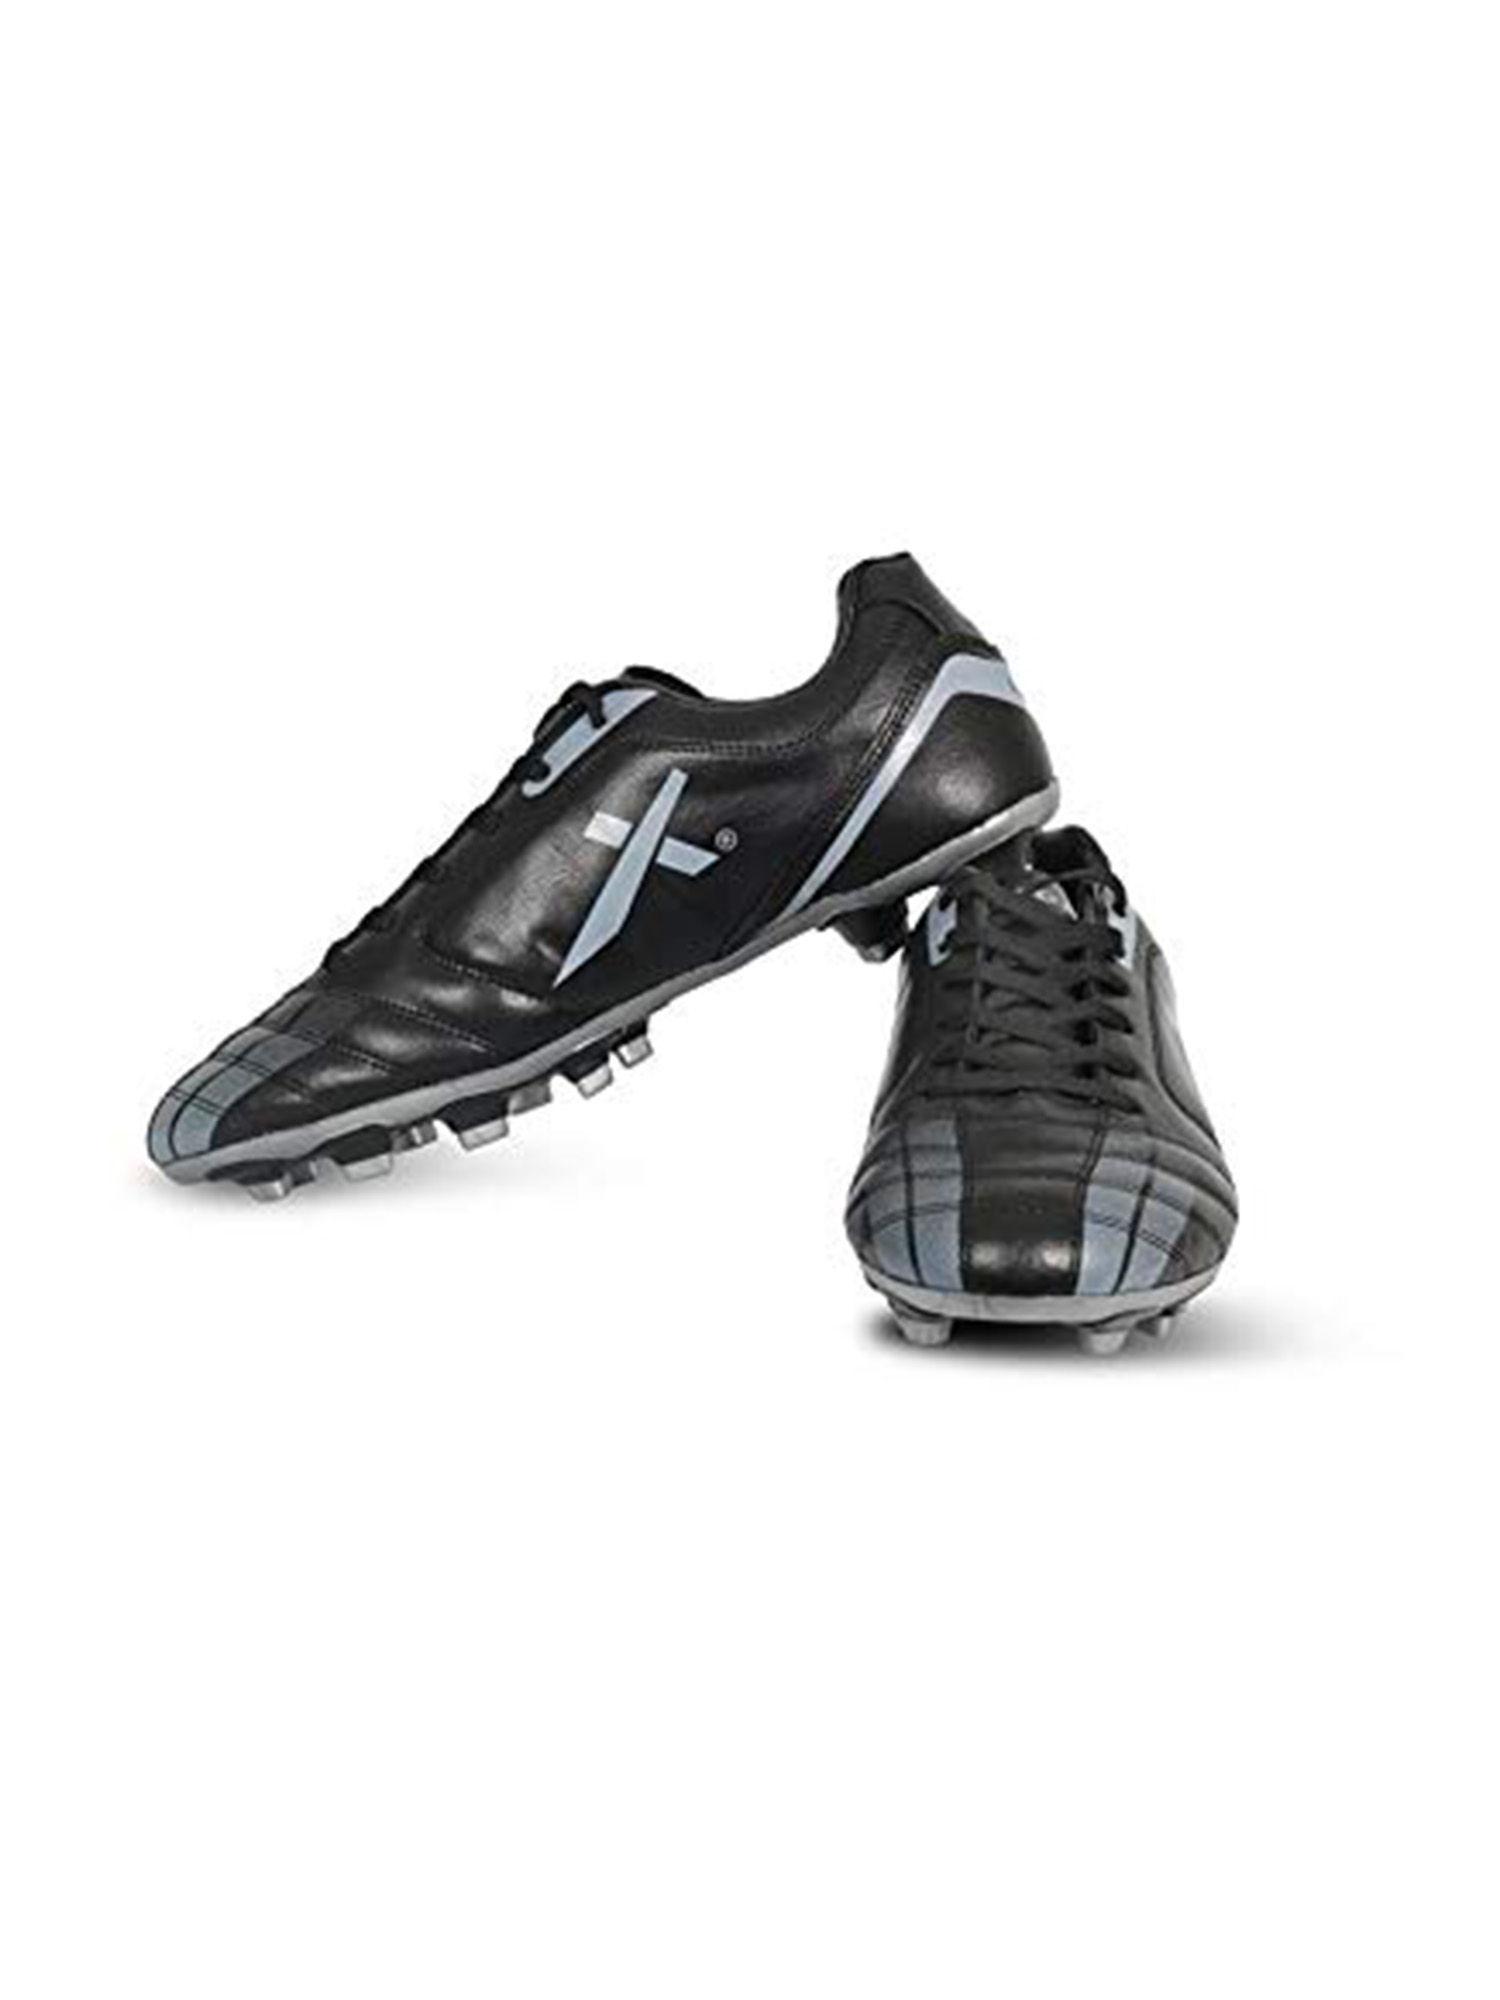 speed-football-shoes-for-men---black---grey